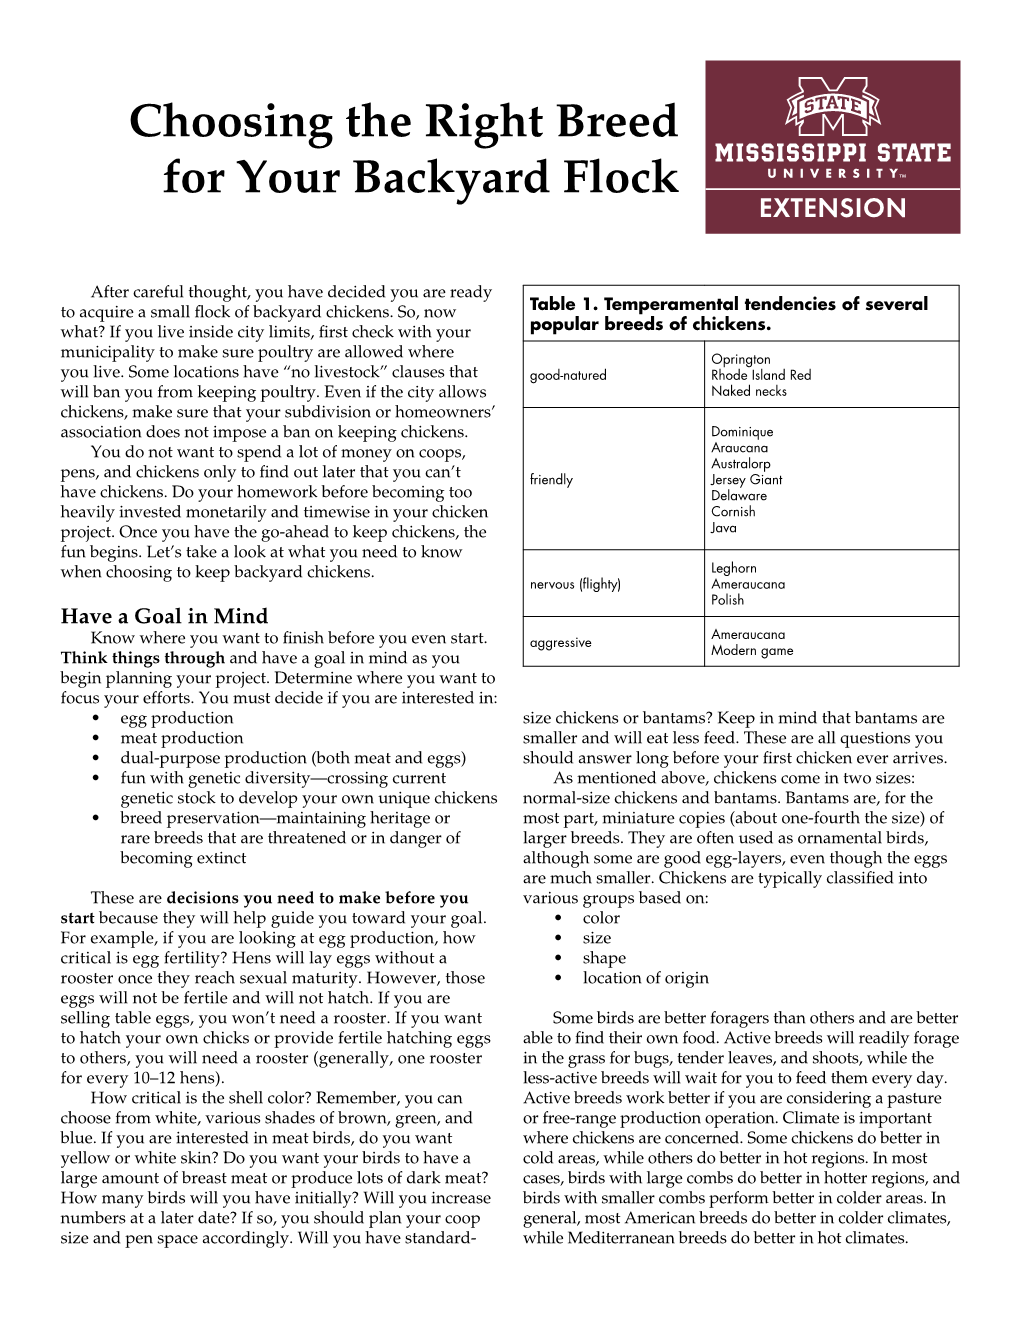 Choosing the Right Breed for Your Backyard Flock